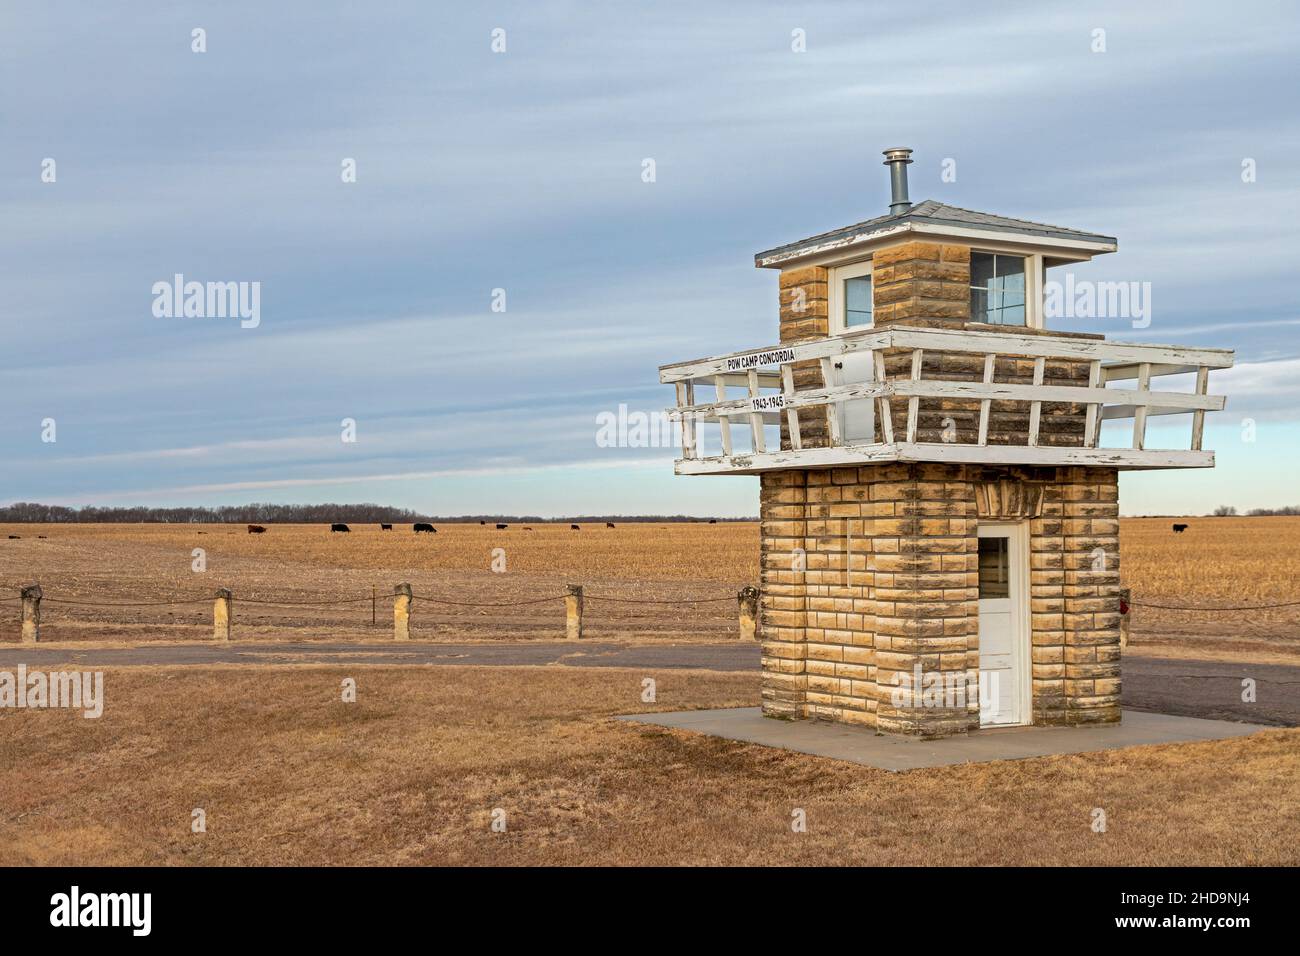 Concordia, Kansas - A guard tower from the World War II prisoner of war camp that held more than 4,000 German soldiers from 1943-1945. The camp had 30 Stock Photo